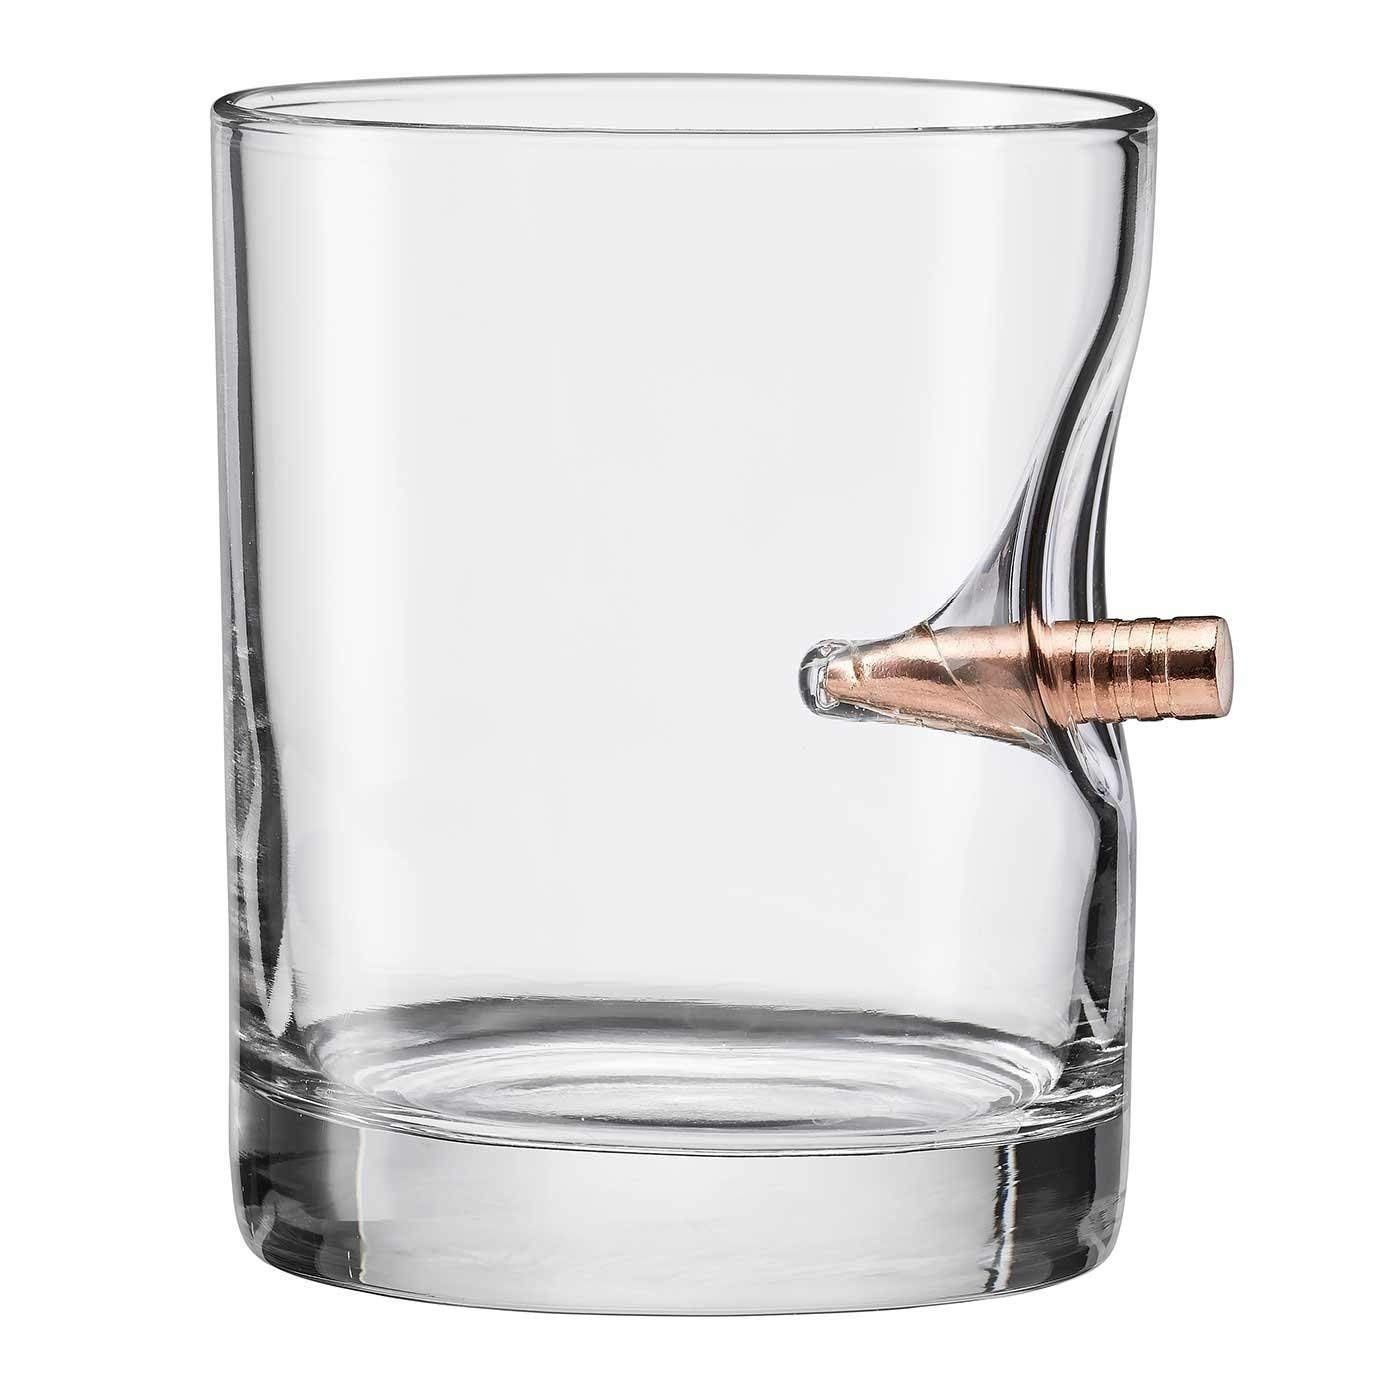 The Original BenShot Bullet Rocks Glass with Real .308 Bullet - 11oz | Made in the USA | Amazon (US)